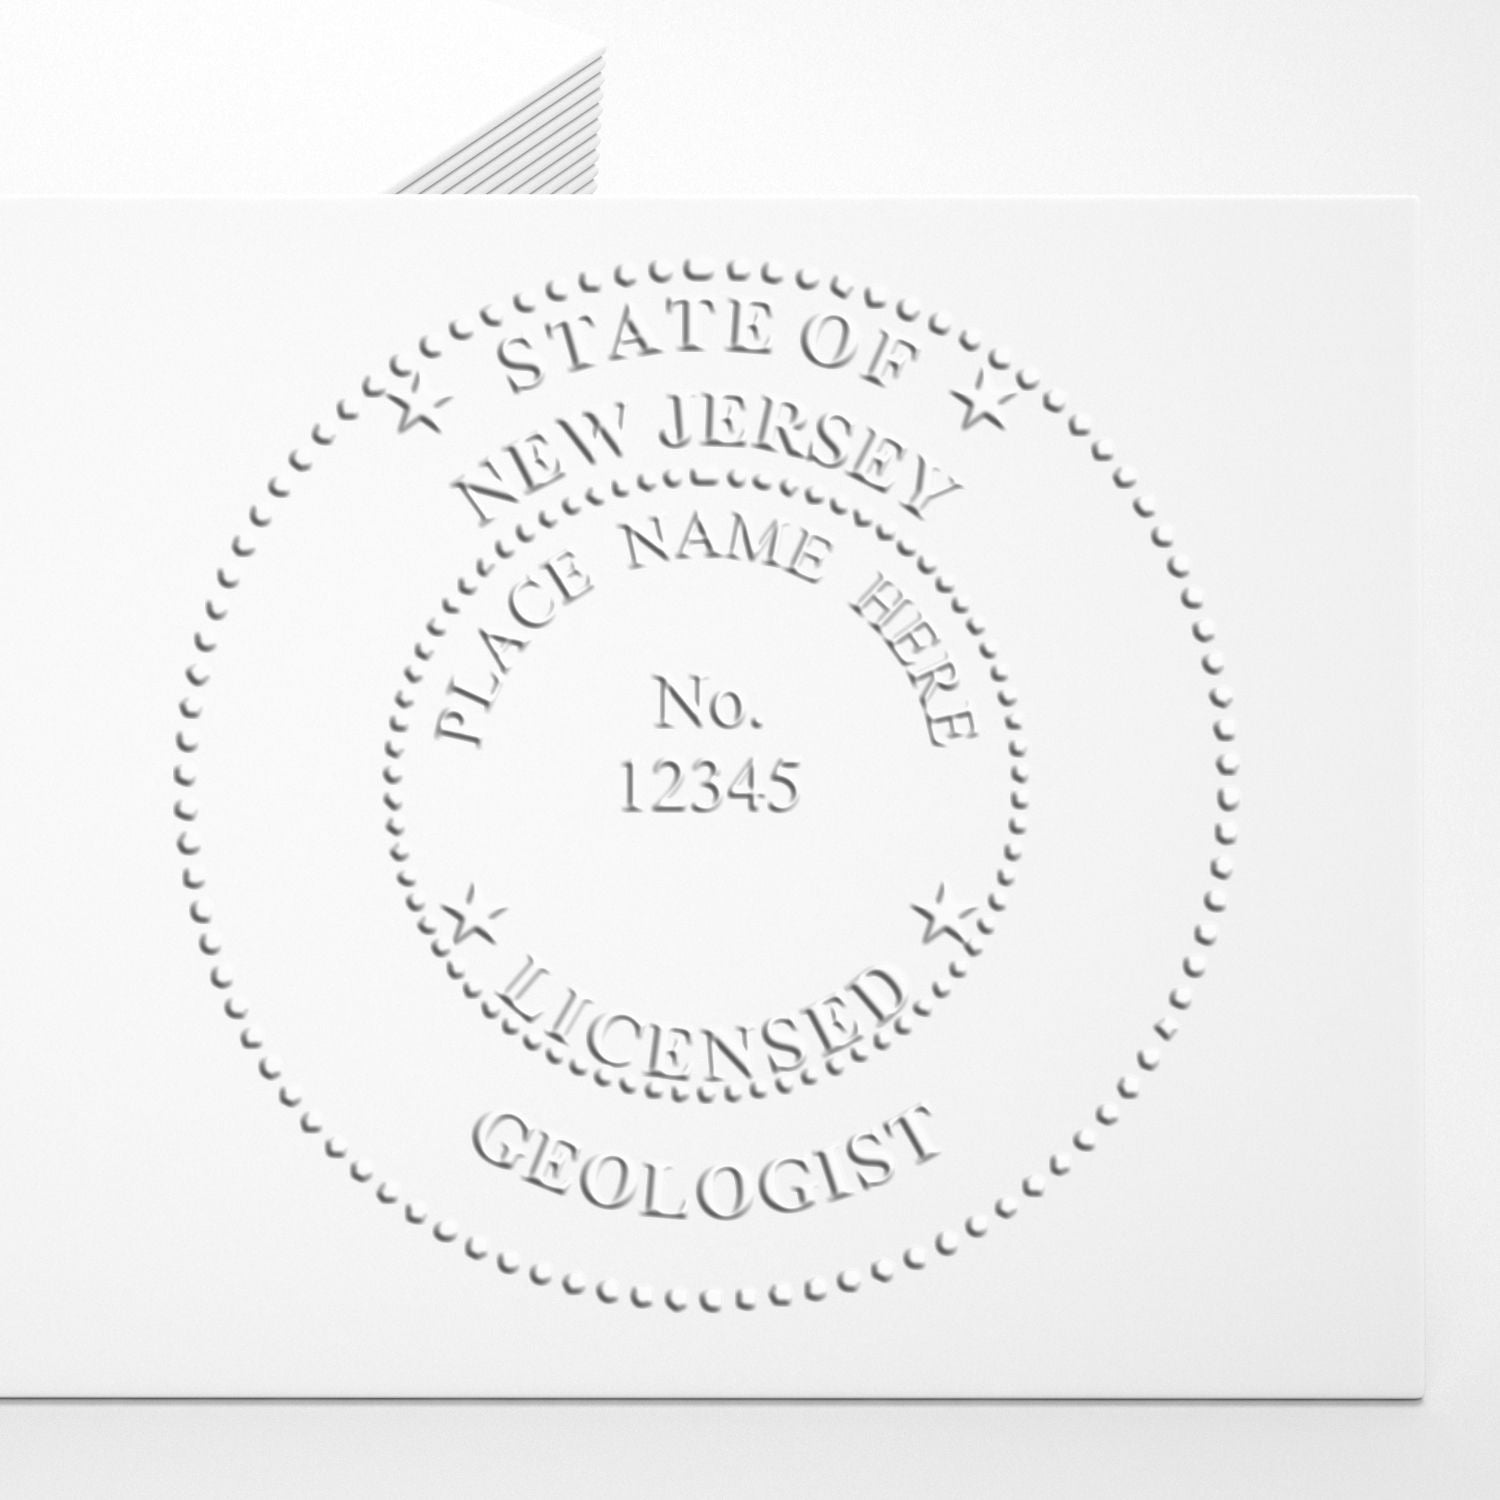 A lifestyle photo showing a stamped image of the Heavy Duty Cast Iron New Jersey Geologist Seal Embosser on a piece of paper